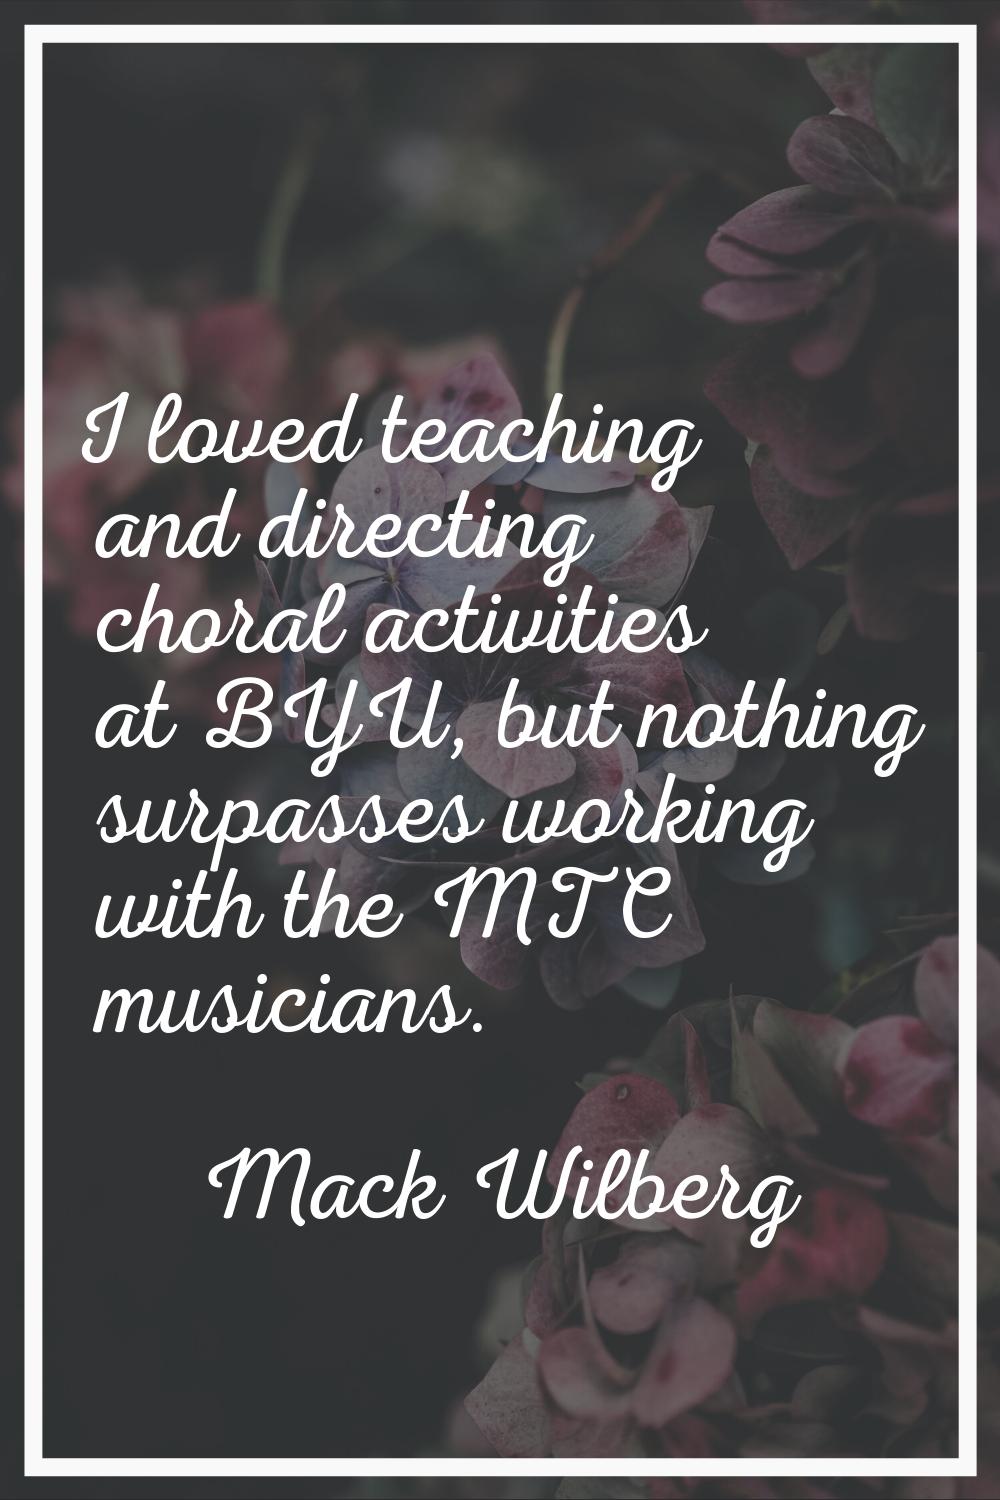 I loved teaching and directing choral activities at BYU, but nothing surpasses working with the MTC